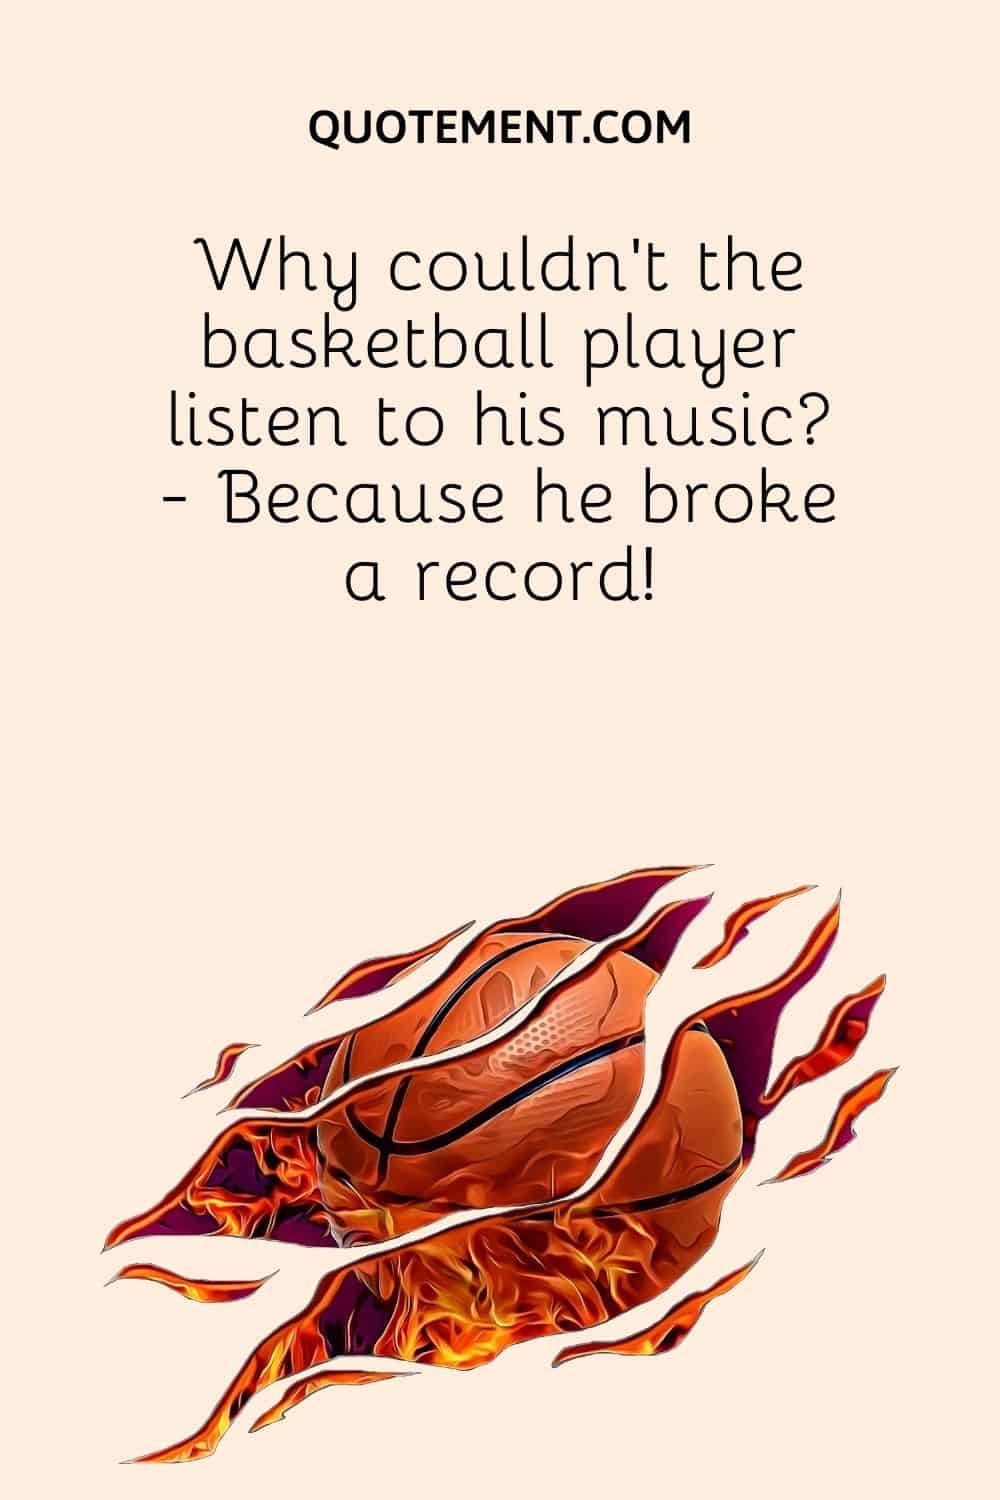 Why couldn’t the basketball player listen to his music